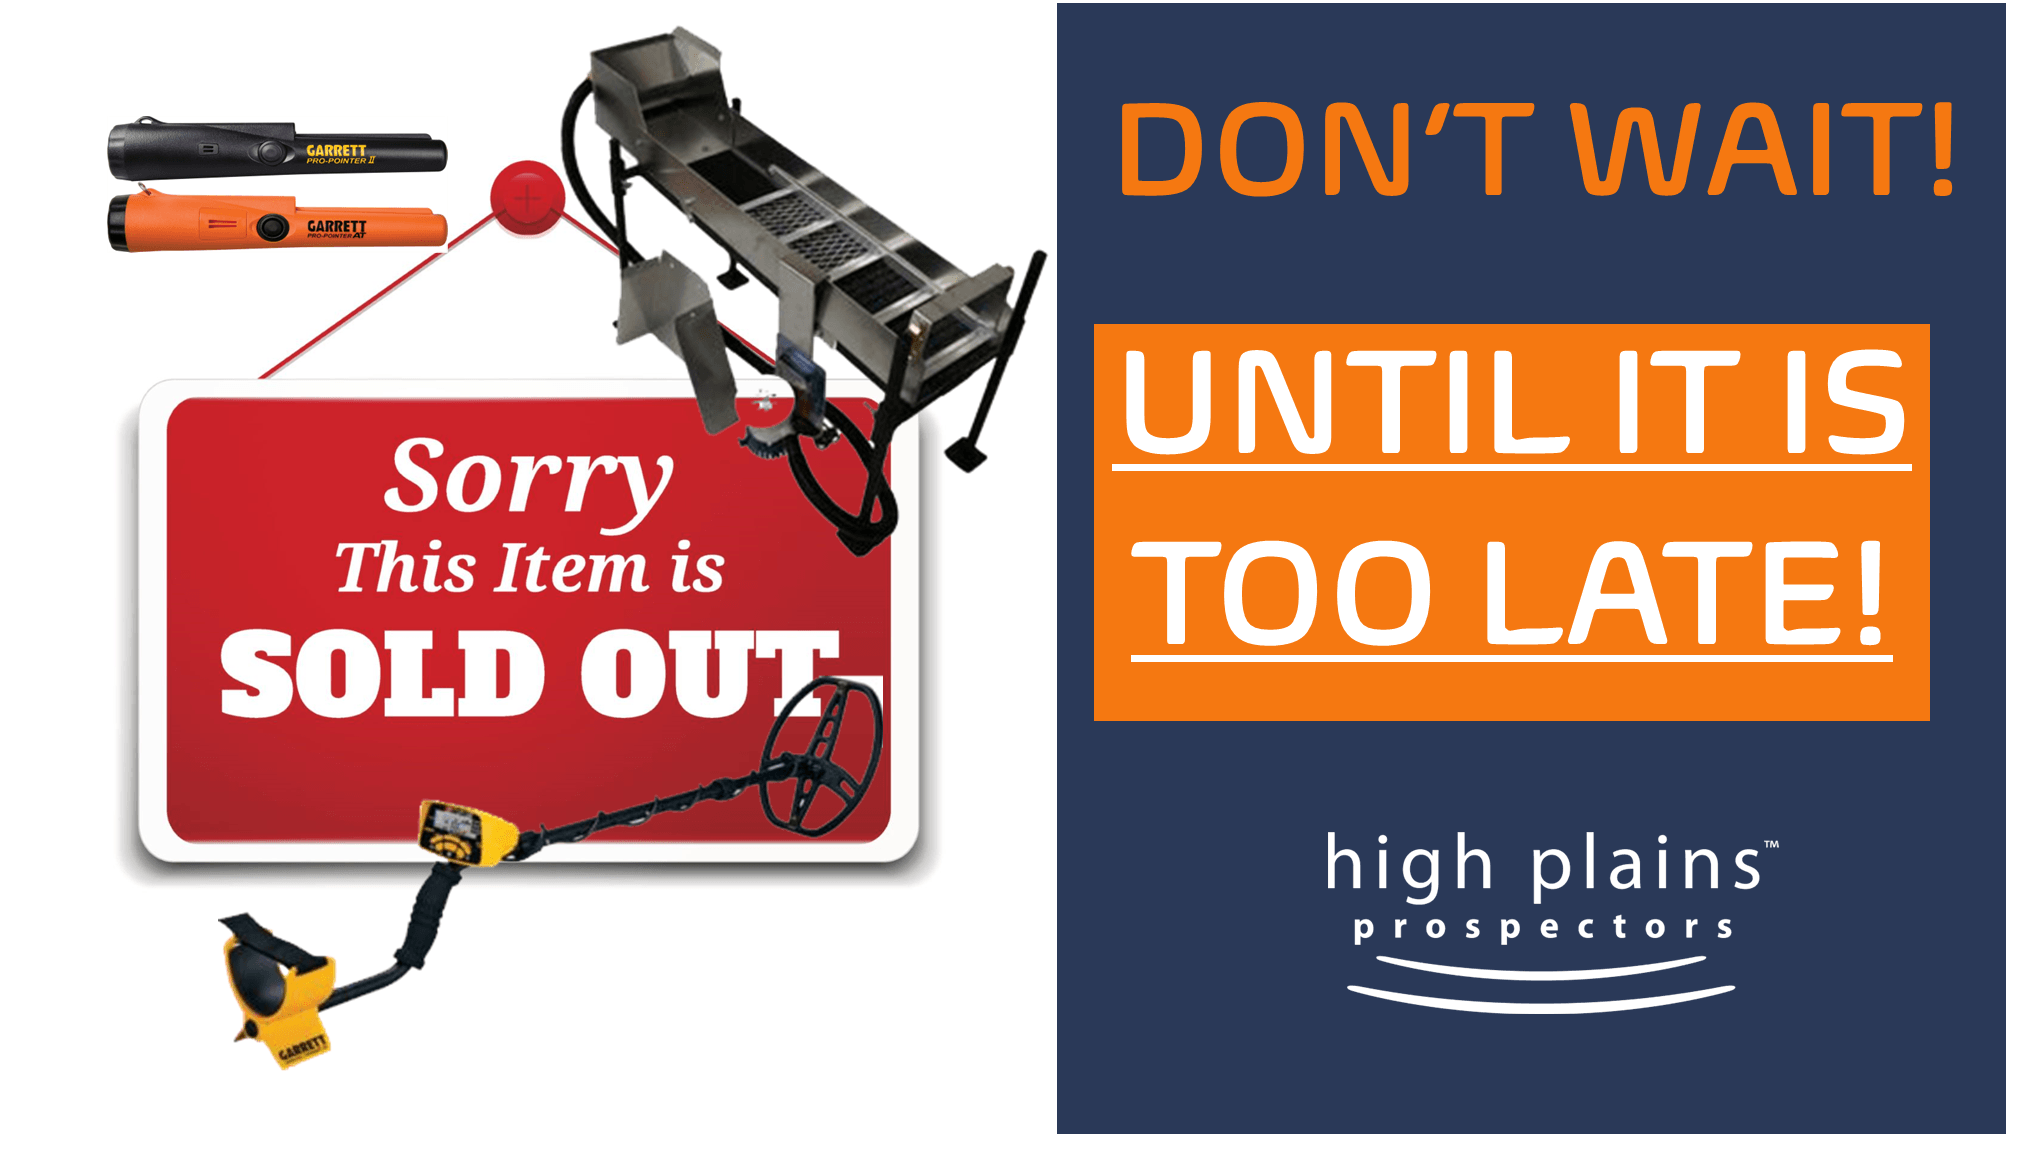 Supply Chain Issues on Metal Detectors and Gold Prospecting Equipment - Order Early or Risk Not Getting Your Items for The Holiday!